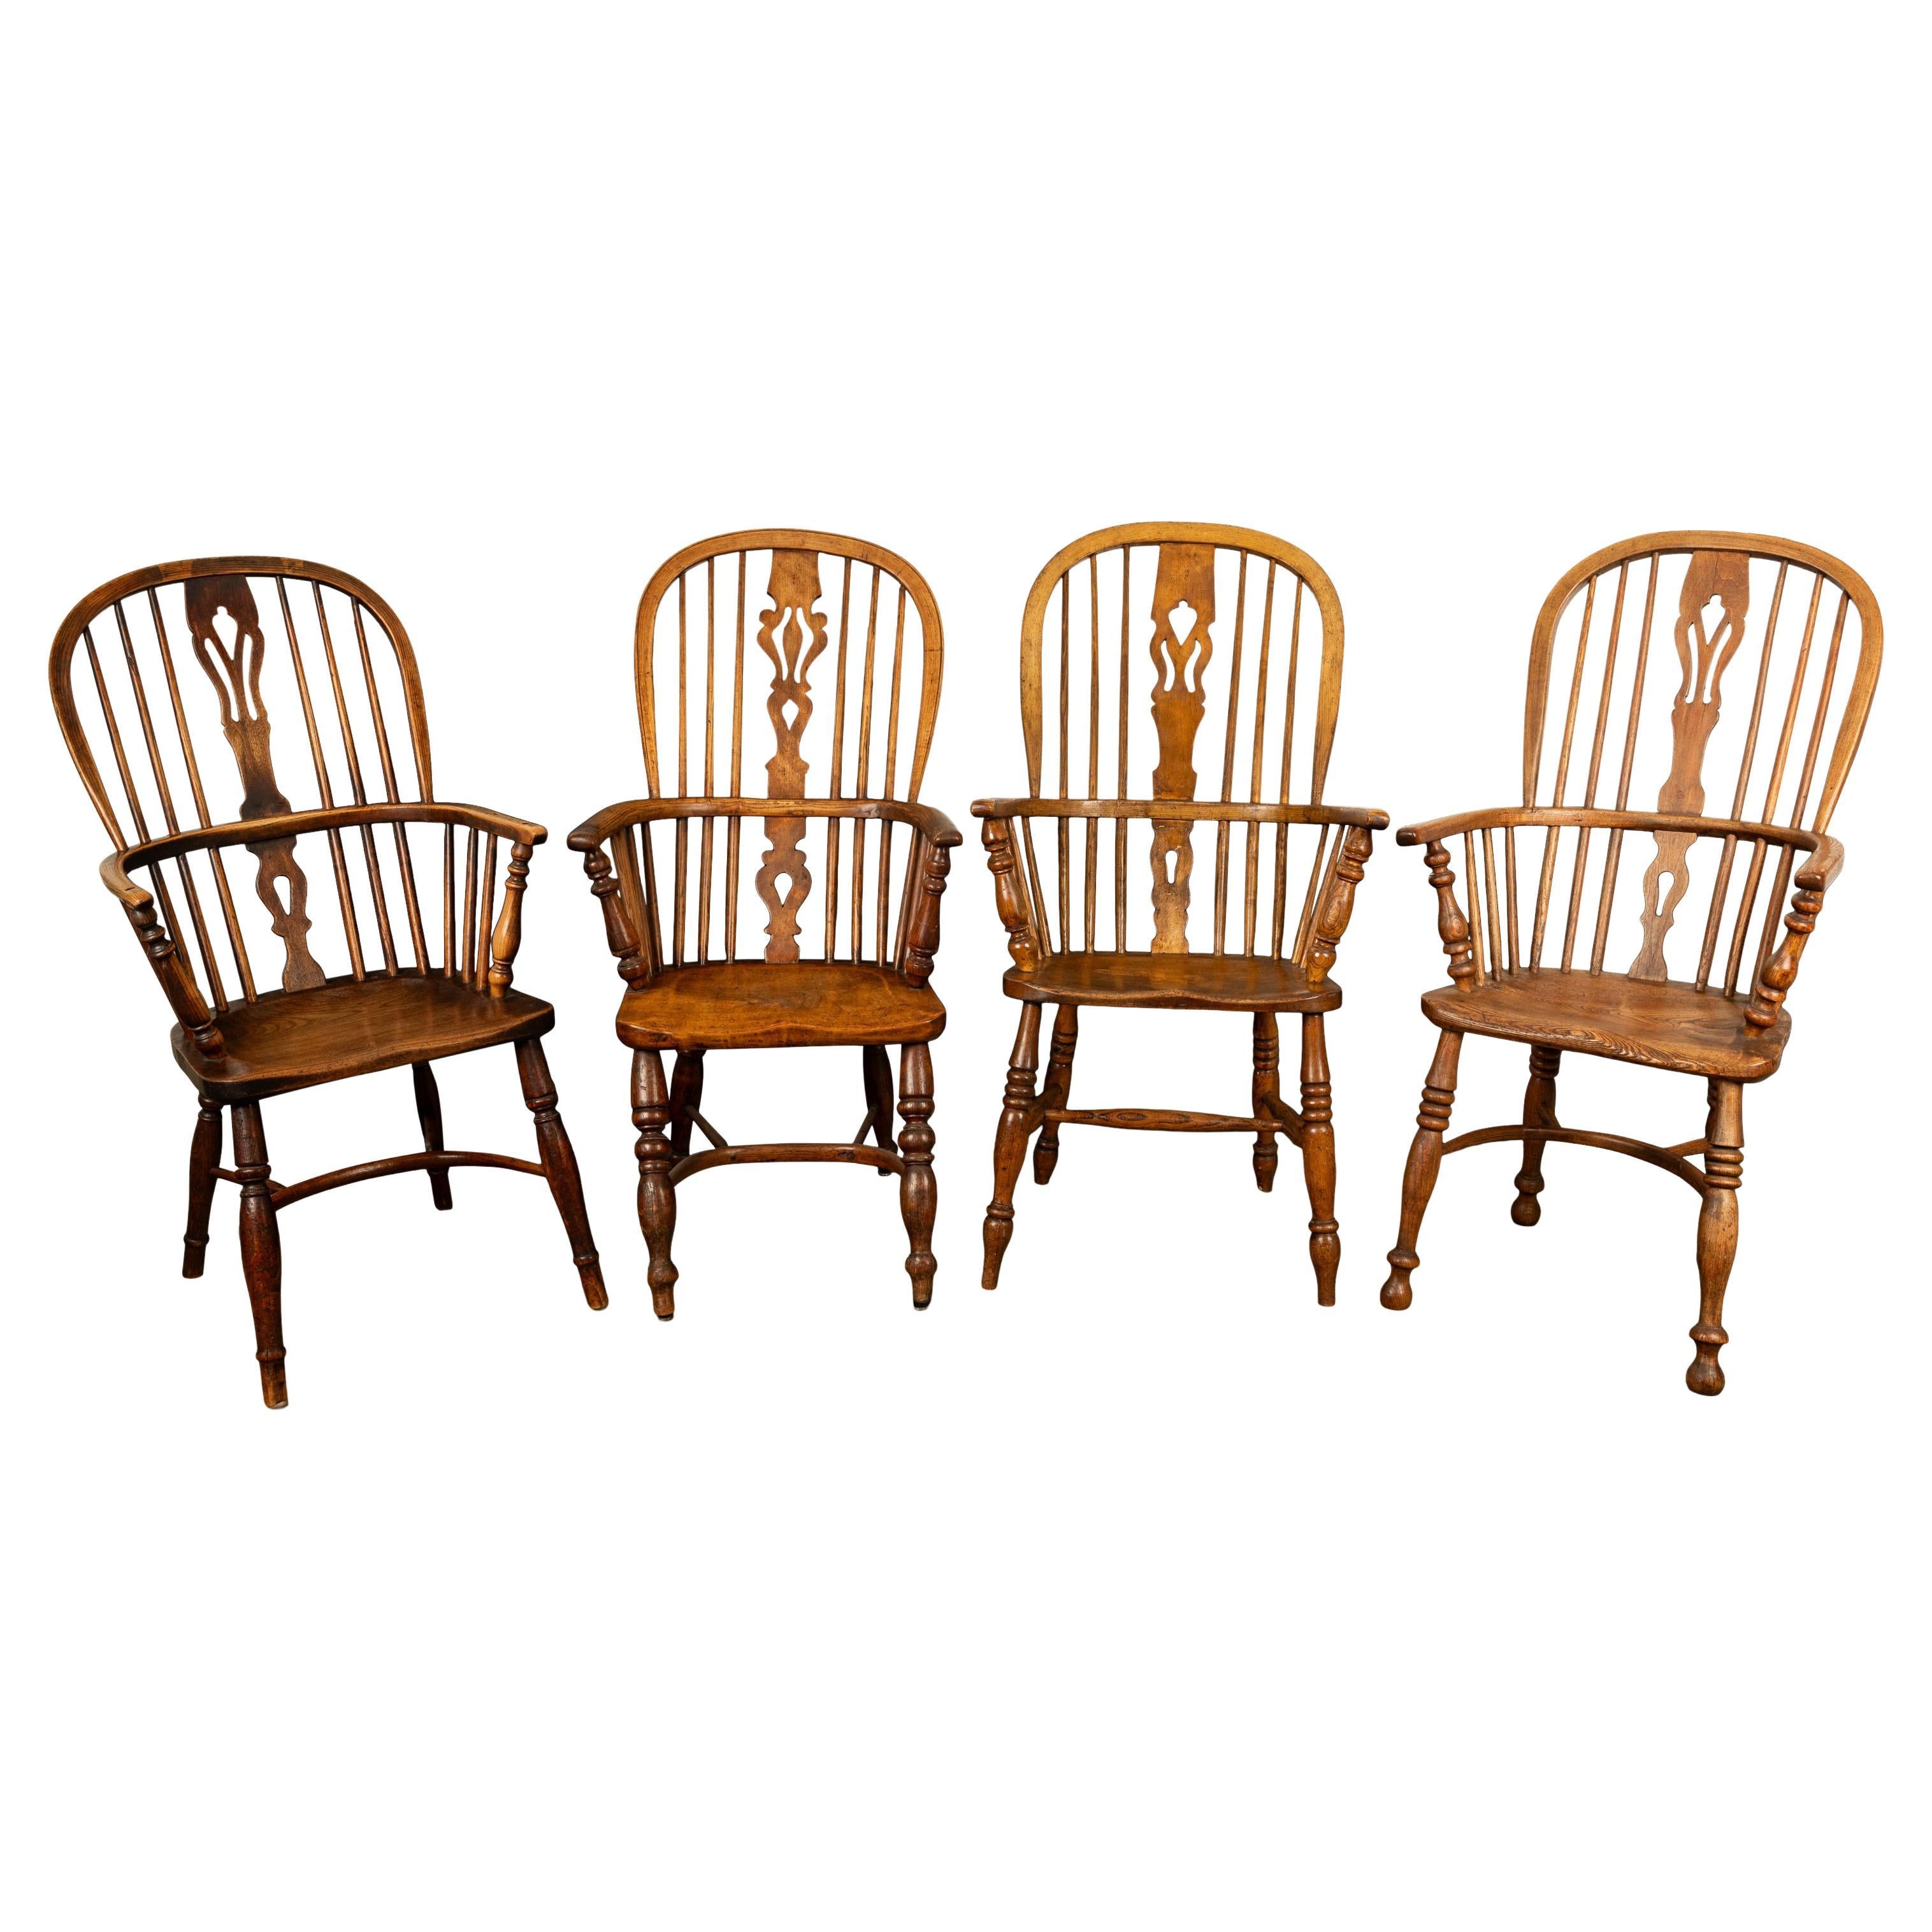 Set 4 Antique 19thC High-backed English Ash Elm Country Windsor Arm Chairs 1840  For Sale